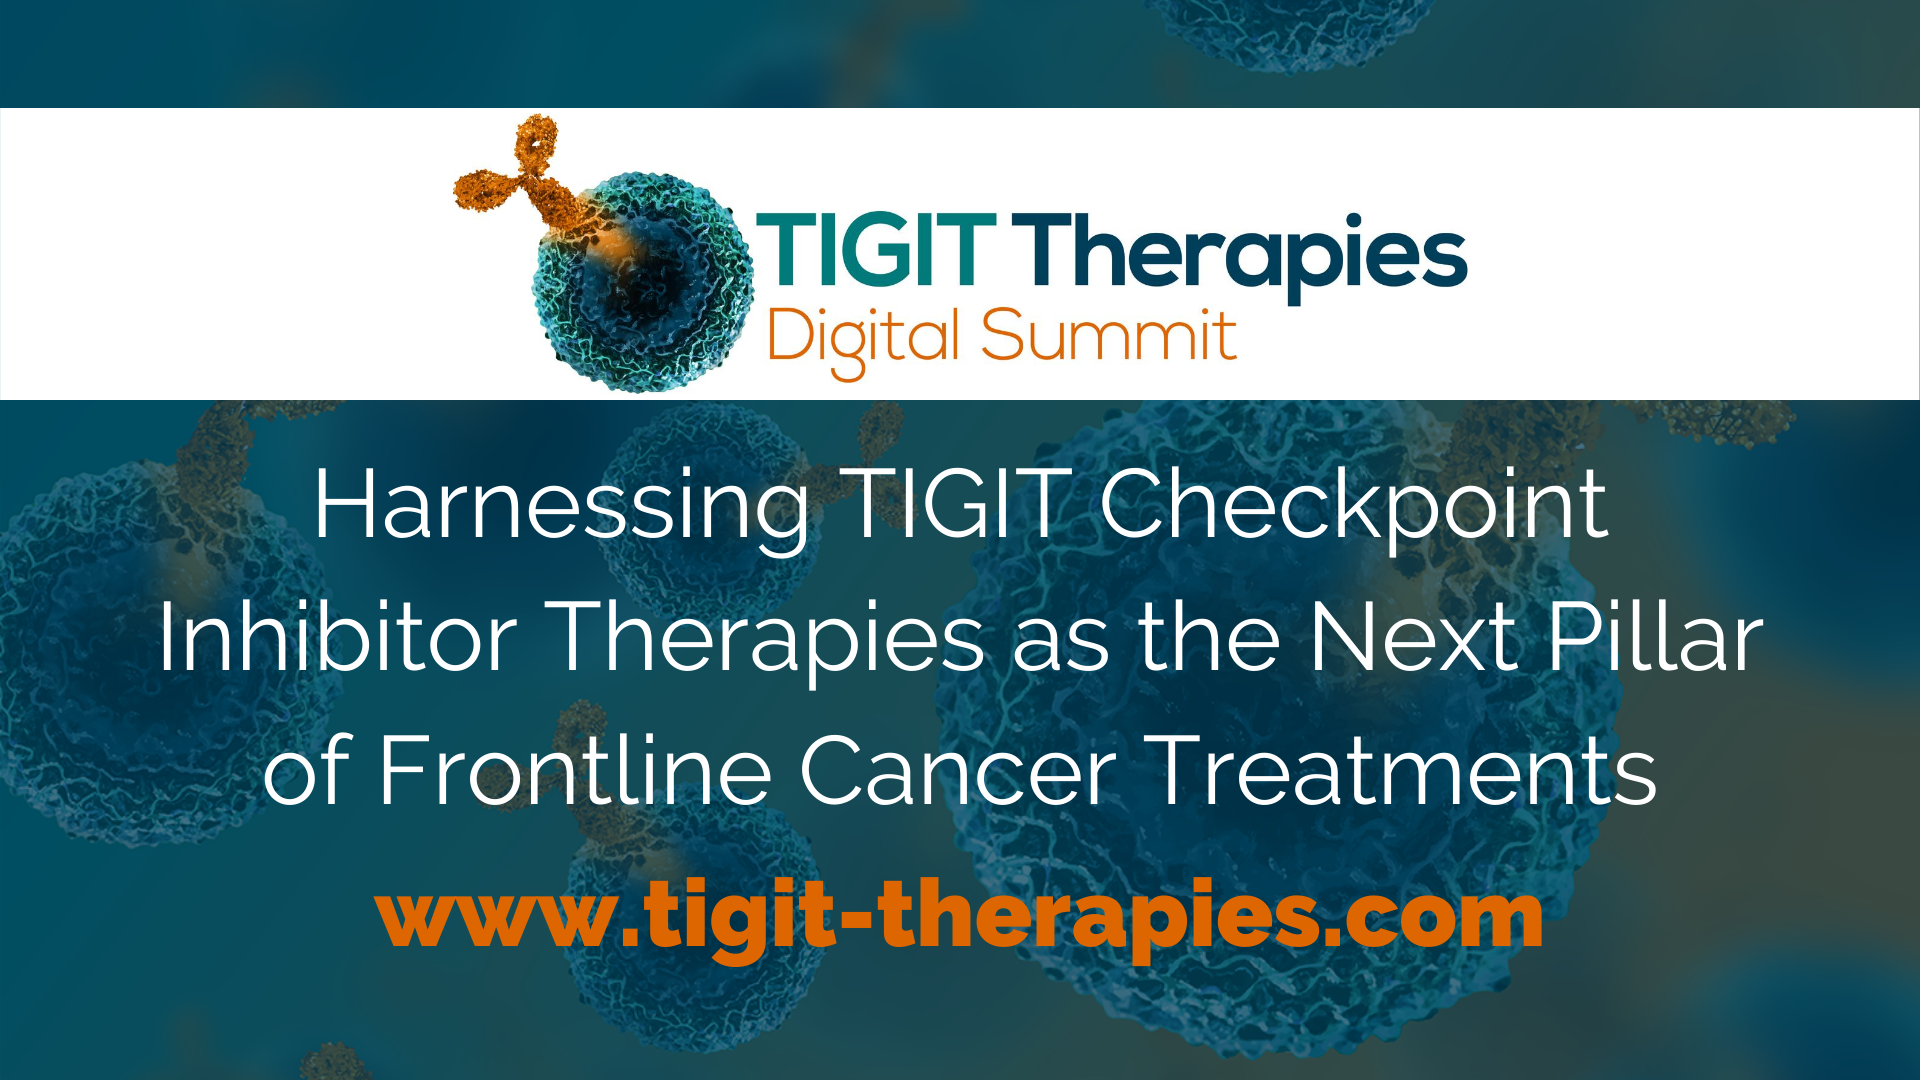 Harnessing TIGIT Checkpoint Inhibitor Therapies as the Next Pillar of Frontline Cancer Treatments